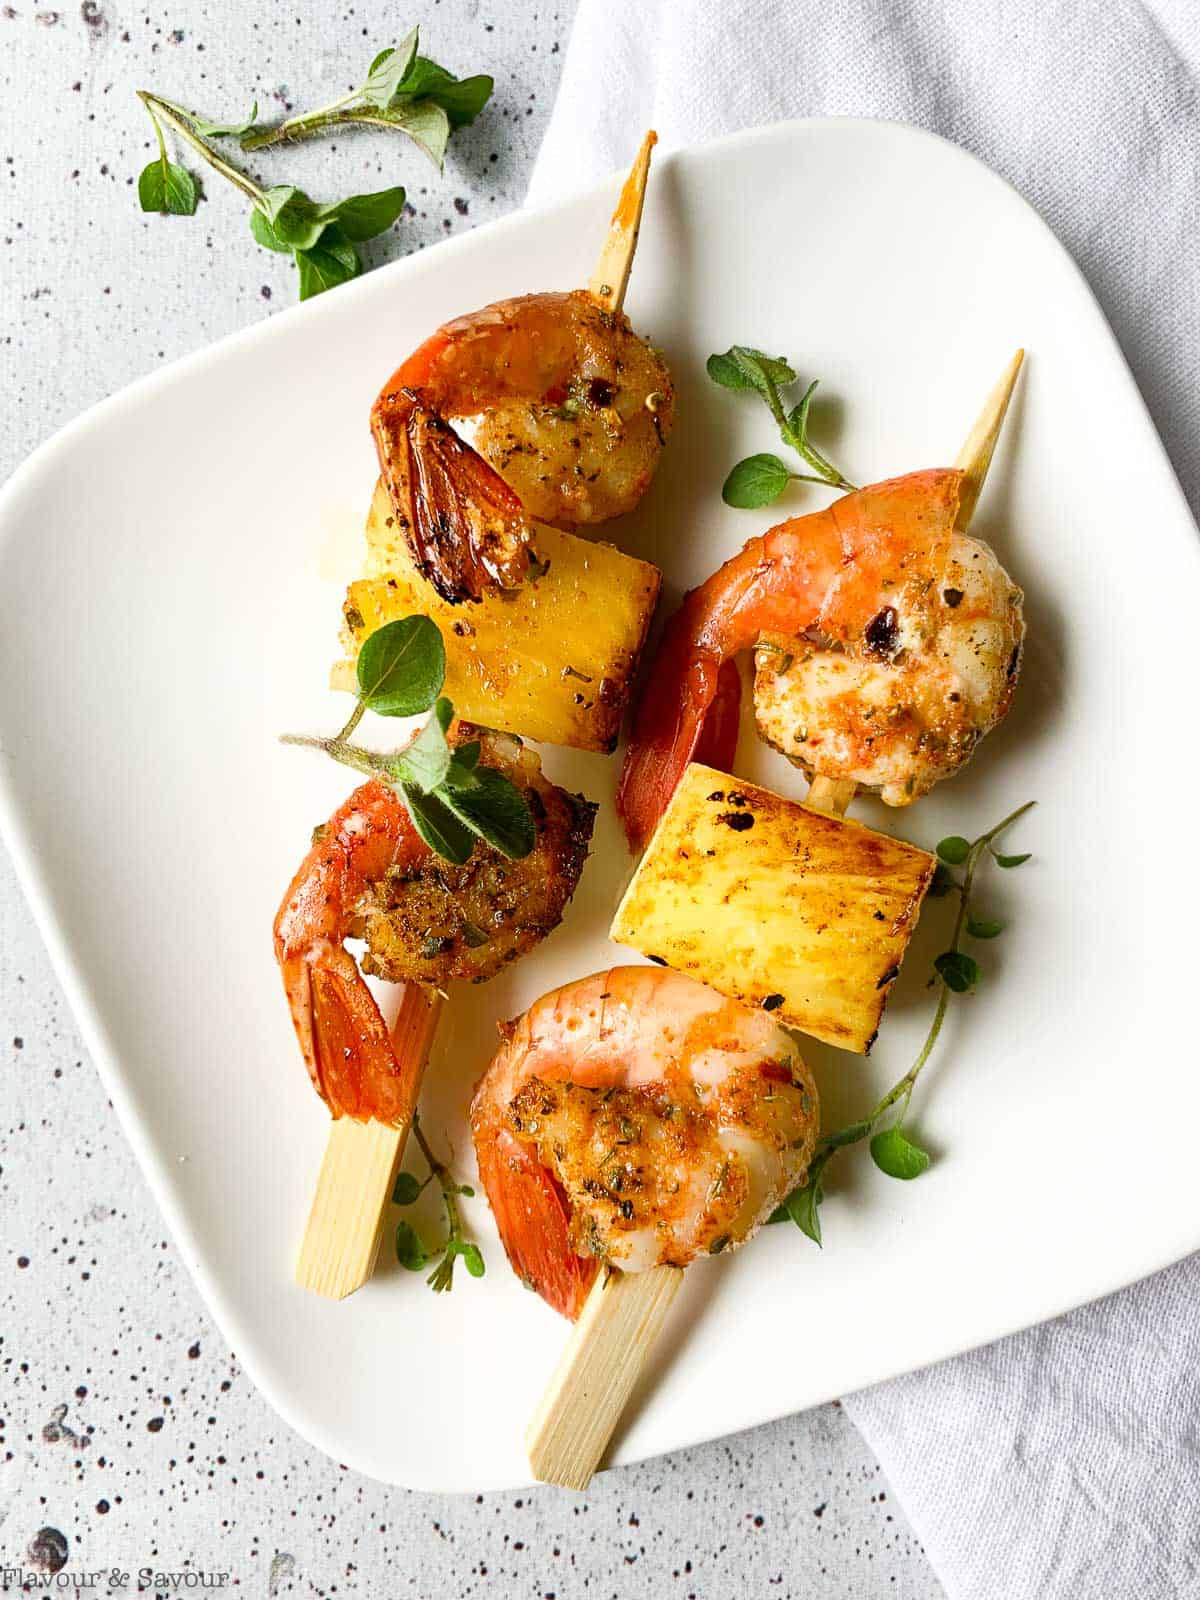 Close up view of two skewers of prawns and pineapple with fresh oregano leaves.